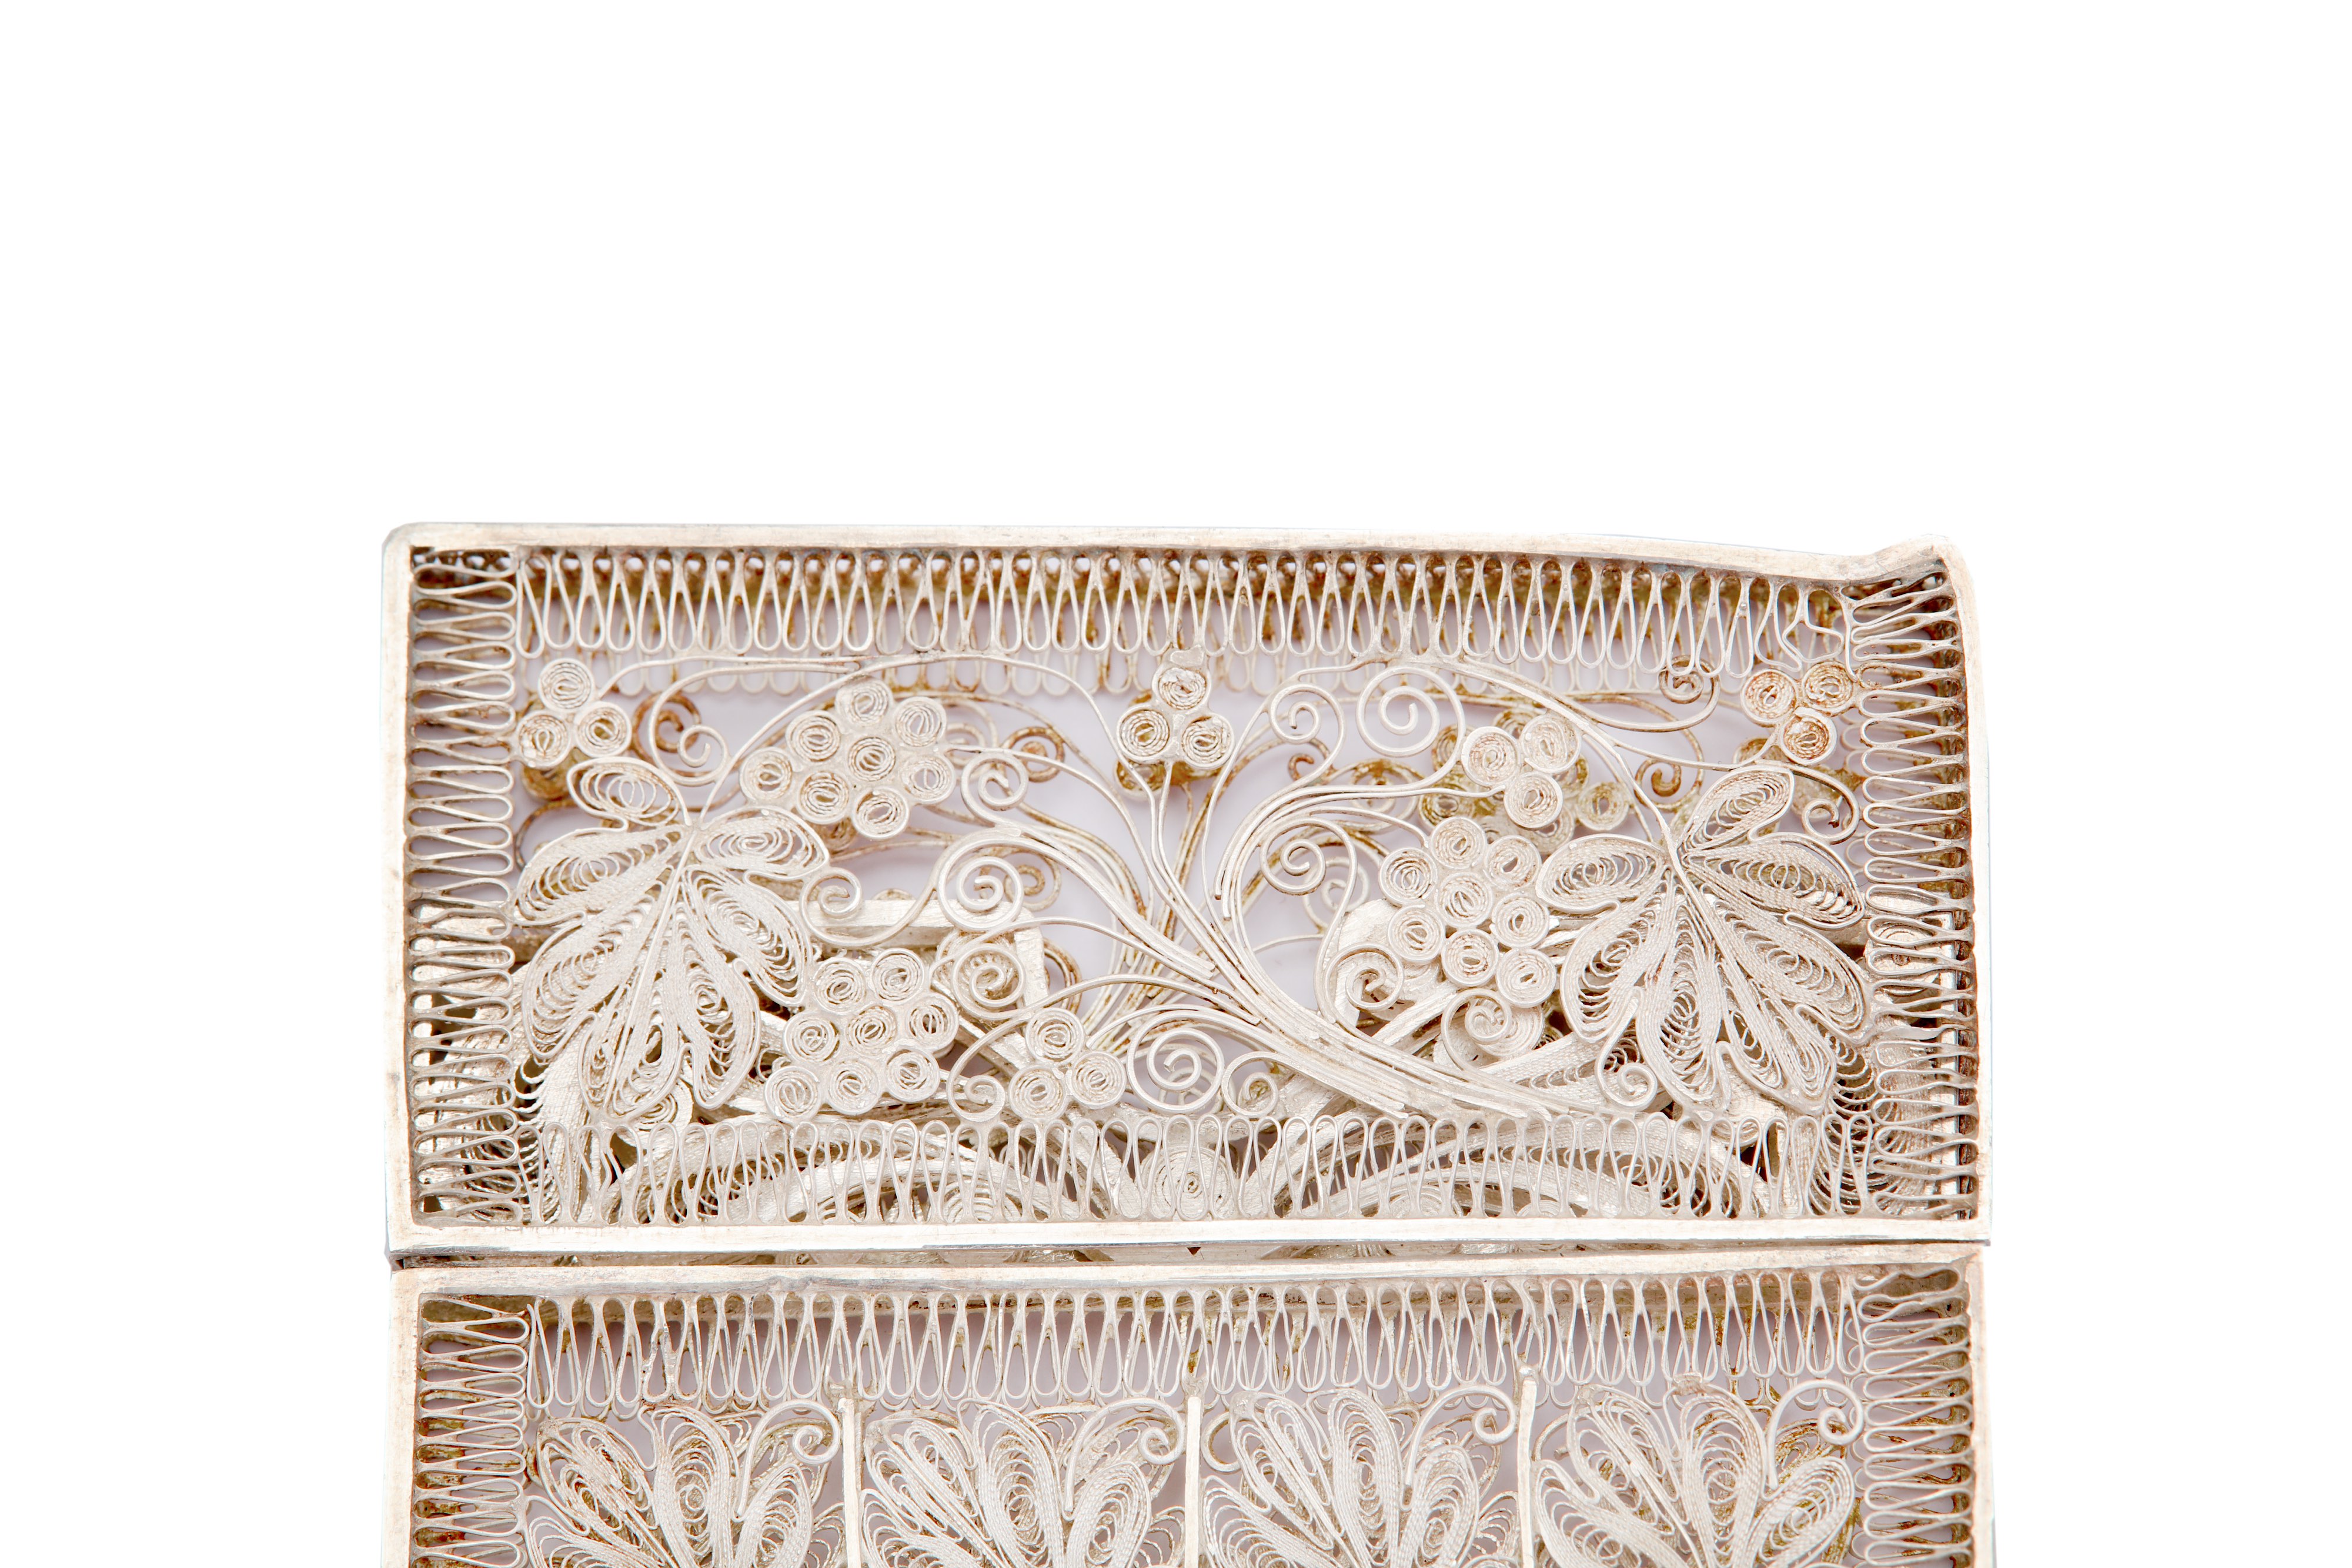 A filigree silver card case - Image 2 of 3